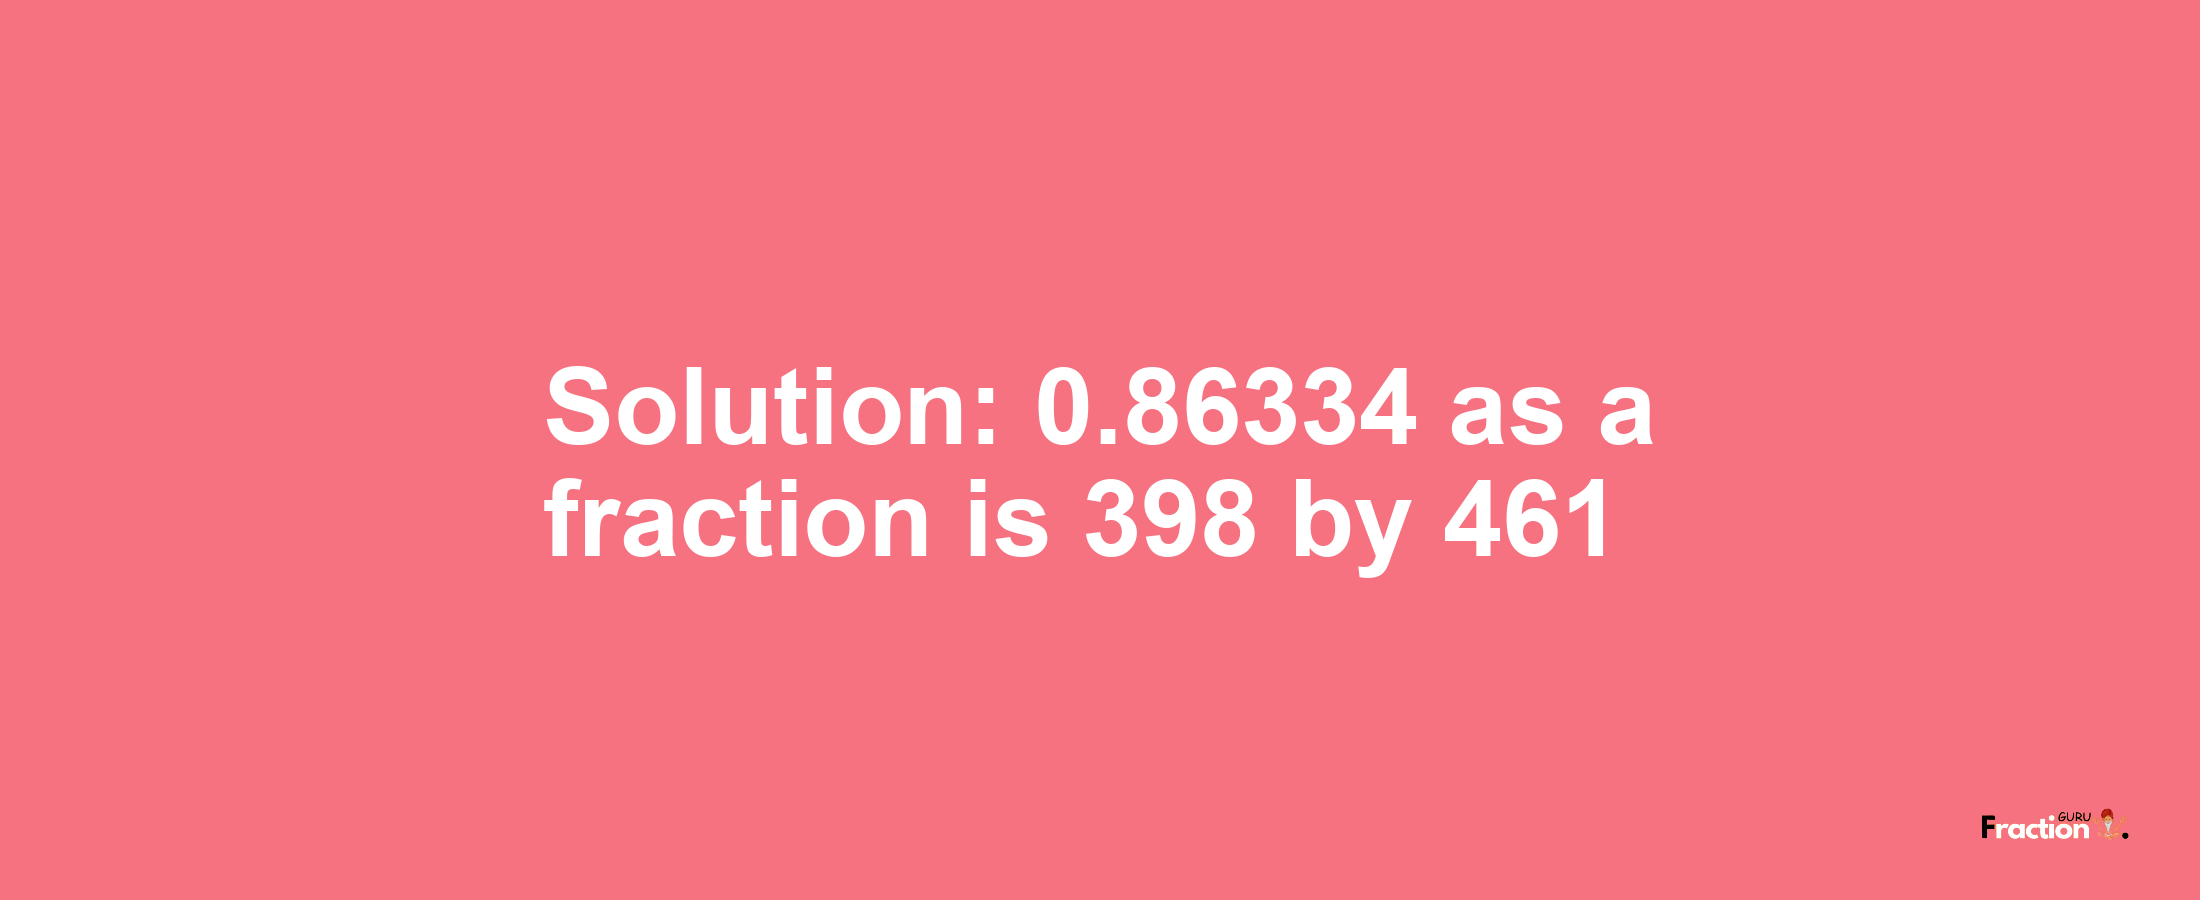 Solution:0.86334 as a fraction is 398/461